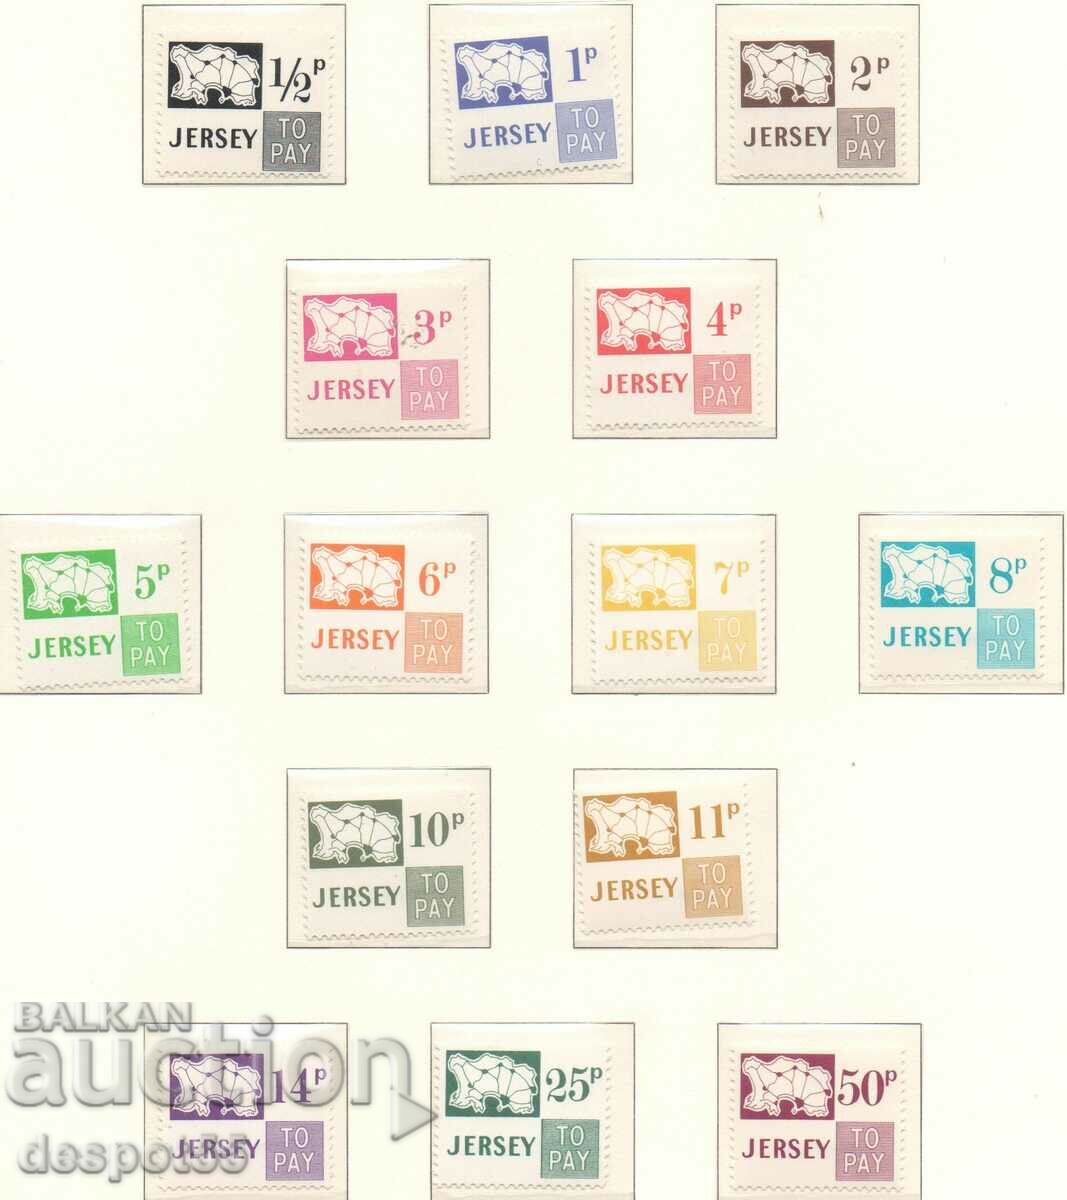 1971. Jersey. Tax Postage Stamps - Map of Jersey.